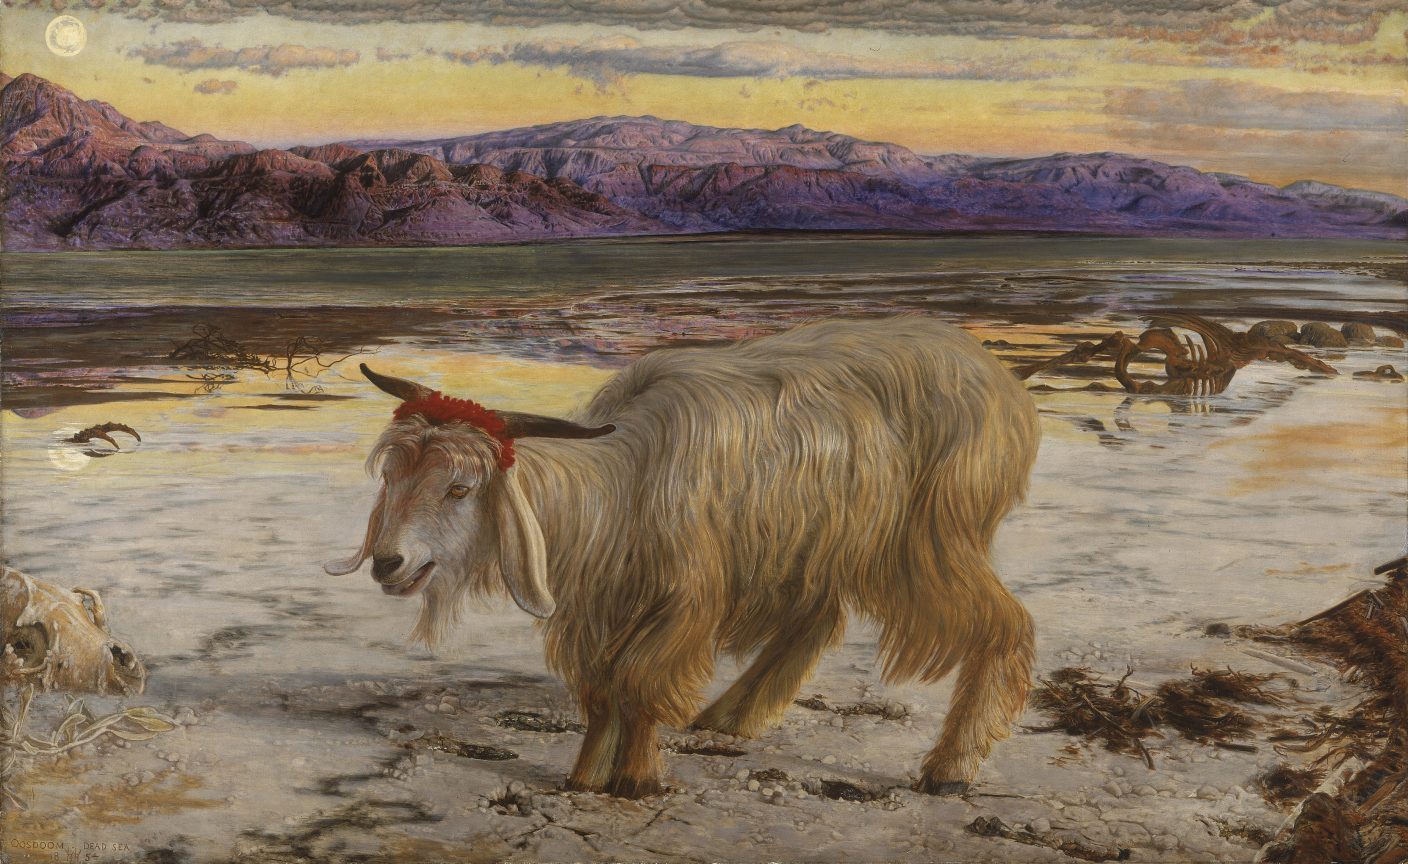 "The Scapegoat," a 19th-century painting by William Holman Hunt